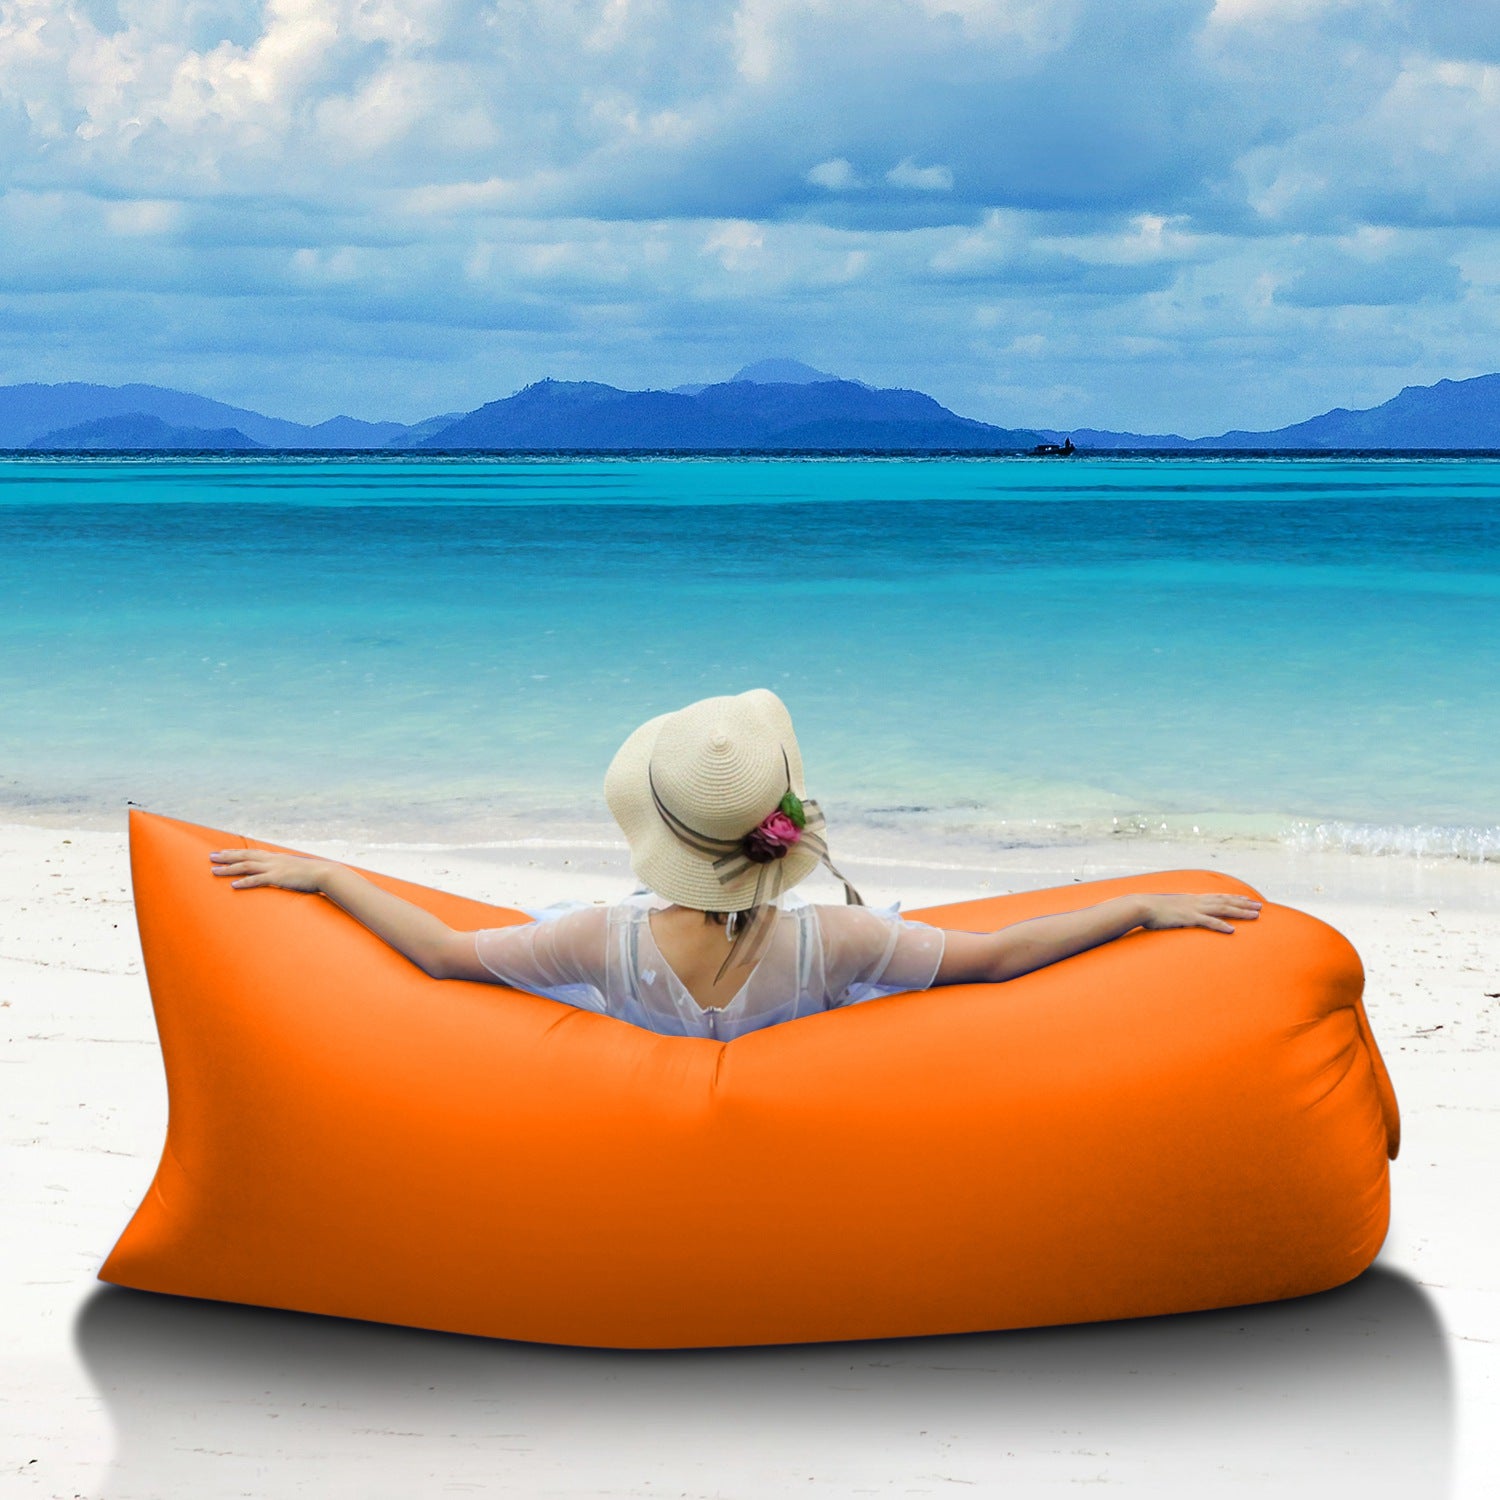 Inflatable Lounger Air Sofa， iMounTEK Portable Inflatable Beach Chair for Camping Hiking Seaside， Inflatable Couch， 75x19.7inch